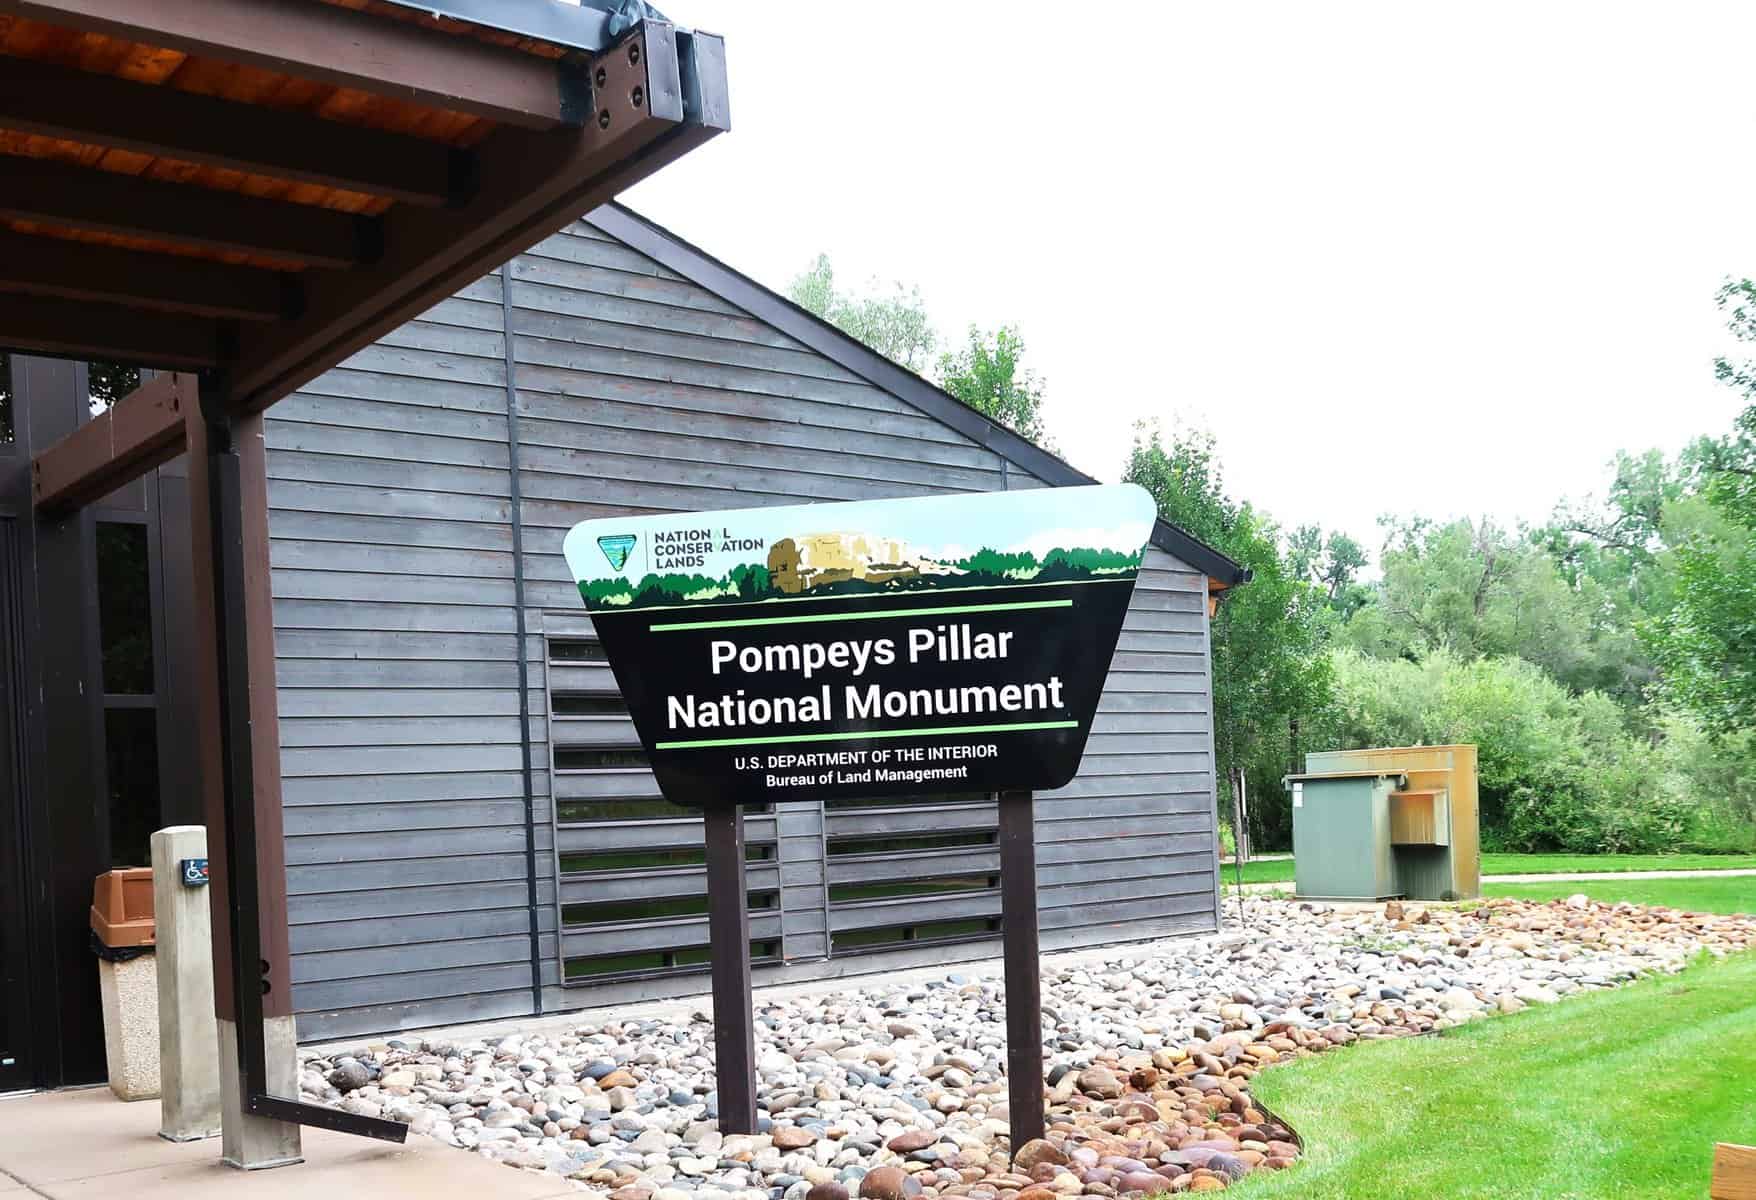 How to enjoy Pompeys Pillar National Monument with Kids!